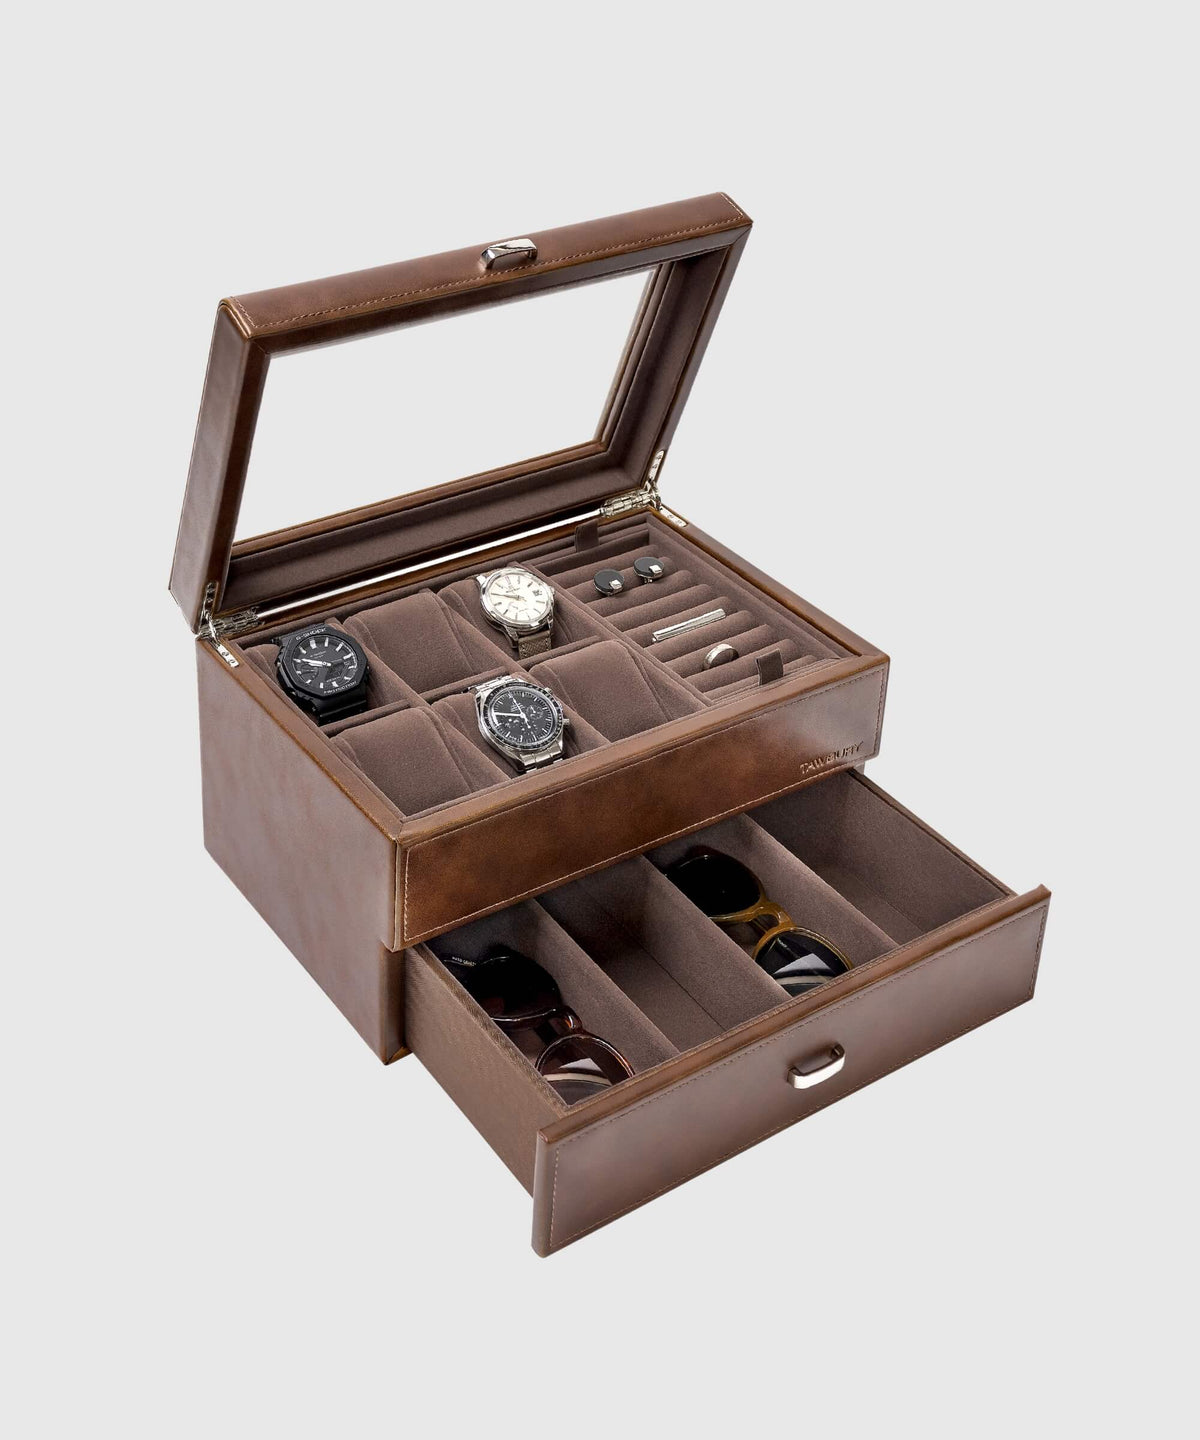 A TAWBURY Bayswater 6 Watch Jewellery Box - Brown with several watches inside.